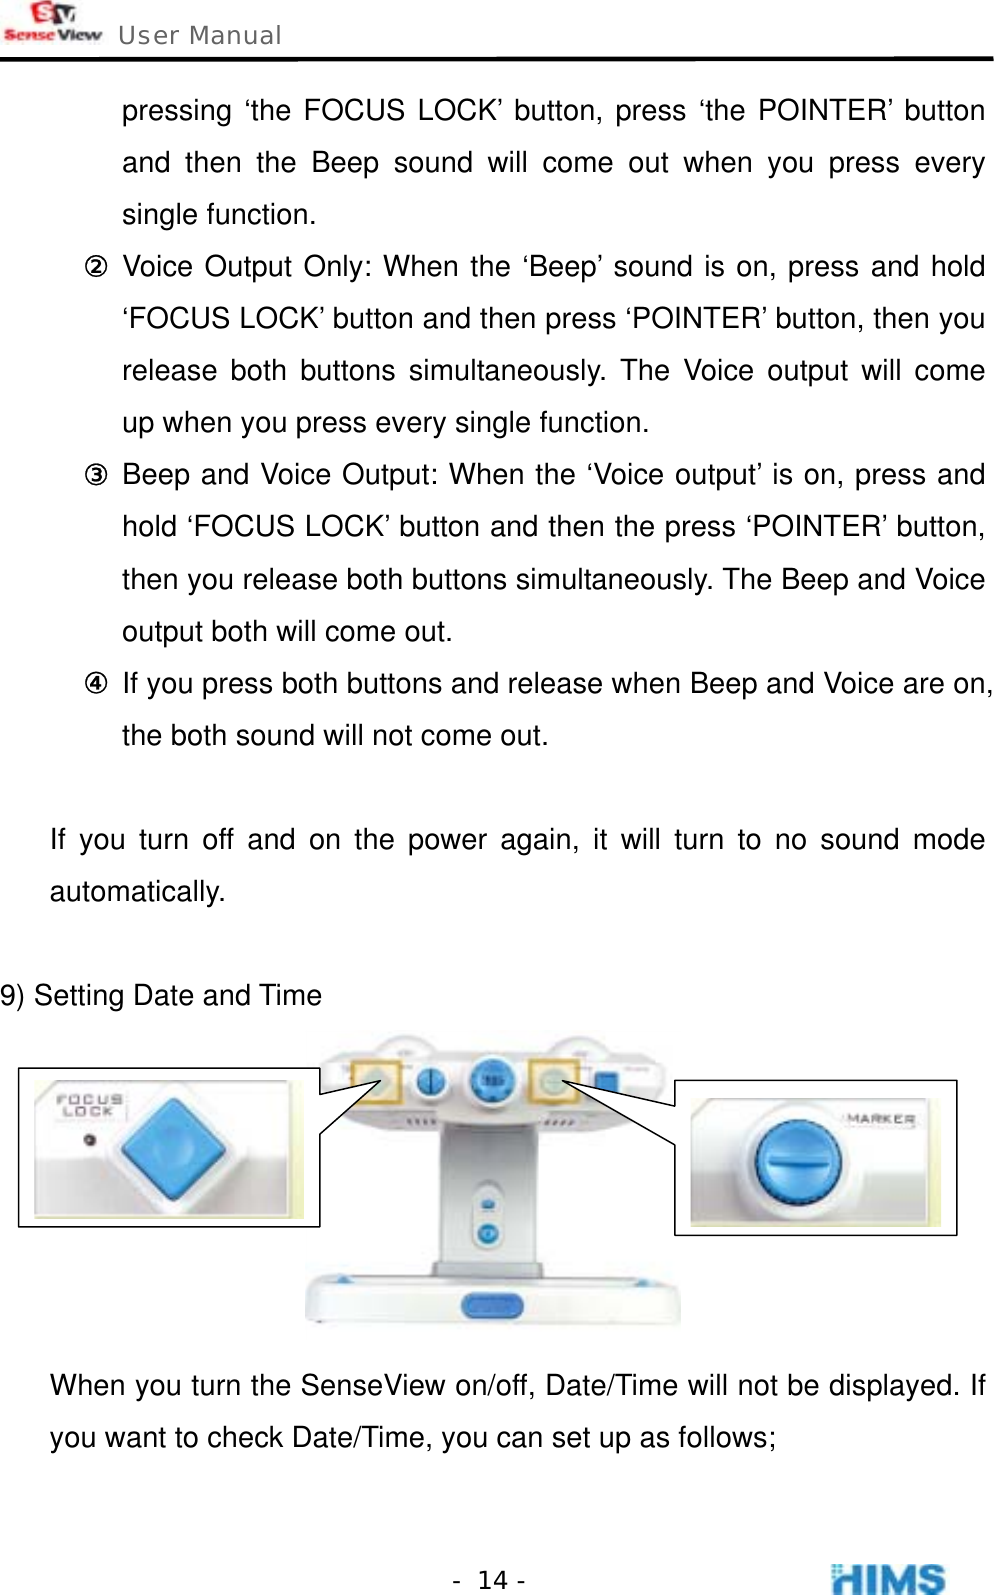  User Manual    - 14 -pressing ‘the FOCUS LOCK’ button, press ‘the POINTER’ button and then the Beep sound will come out when you press every single function. ② Voice Output Only: When the ‘Beep’ sound is on, press and hold ‘FOCUS LOCK’ button and then press ‘POINTER’ button, then you release both buttons simultaneously. The Voice output will come up when you press every single function. ③ Beep and Voice Output: When the ‘Voice output’ is on, press and hold ‘FOCUS LOCK’ button and then the press ‘POINTER’ button, then you release both buttons simultaneously. The Beep and Voice output both will come out. ④ If you press both buttons and release when Beep and Voice are on, the both sound will not come out.  If you turn off and on the power again, it will turn to no sound mode automatically.   9) Setting Date and Time  When you turn the SenseView on/off, Date/Time will not be displayed. If you want to check Date/Time, you can set up as follows;  